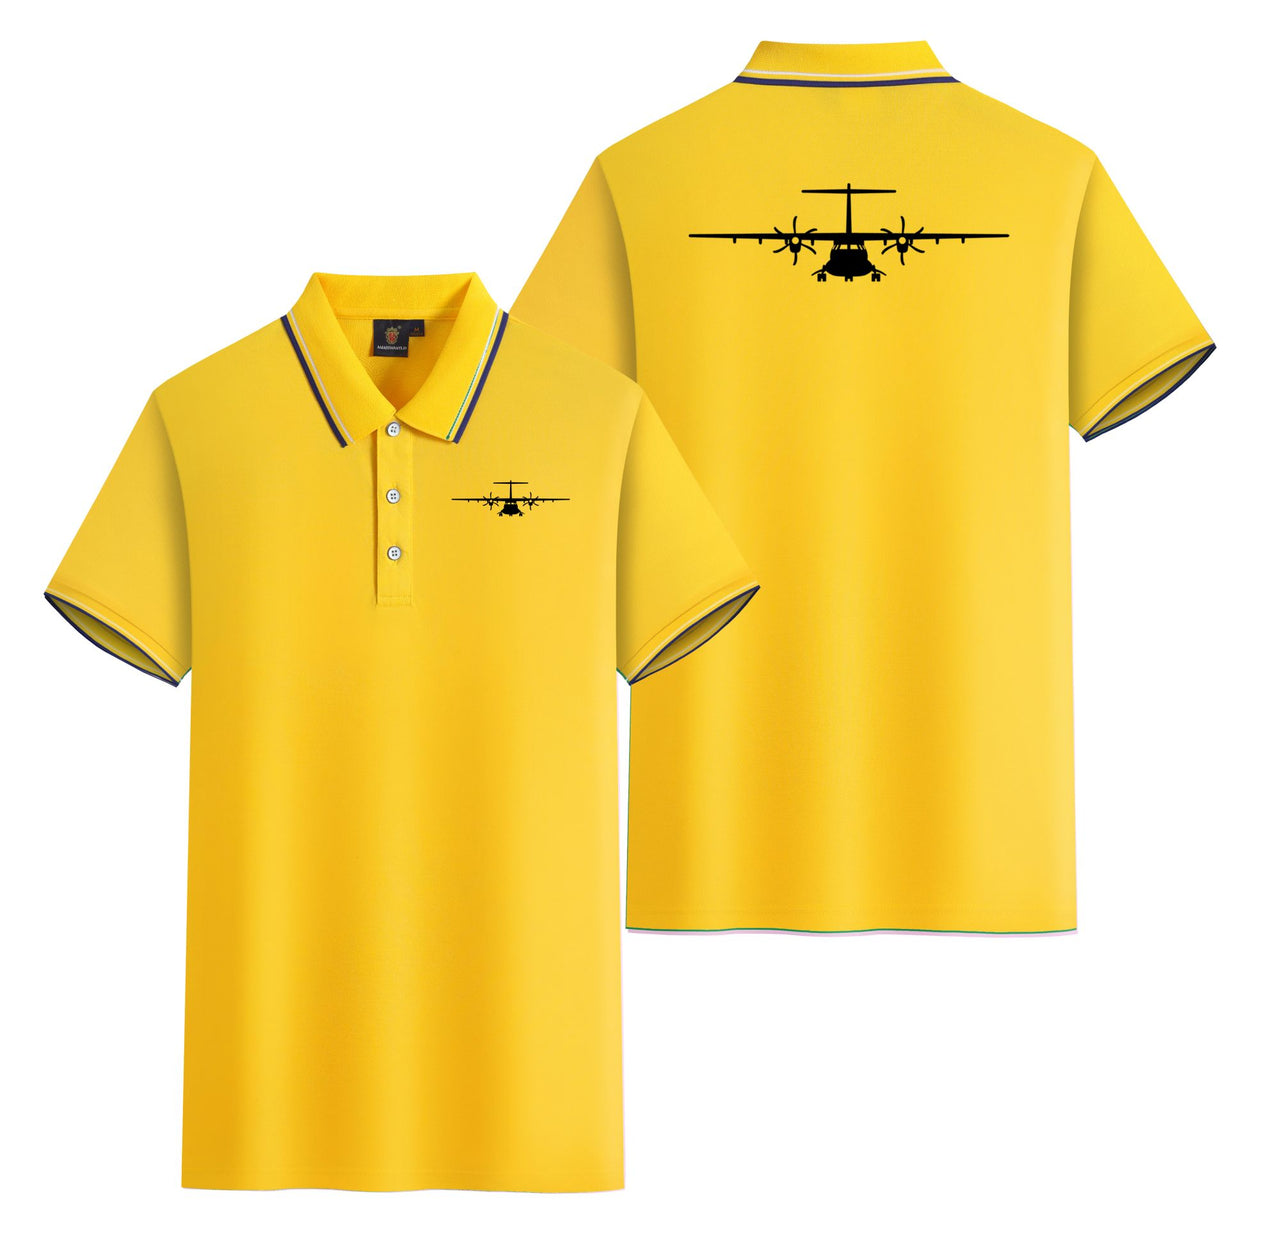 ATR-72 Silhouette Designed Stylish Polo T-Shirts (Double-Side)